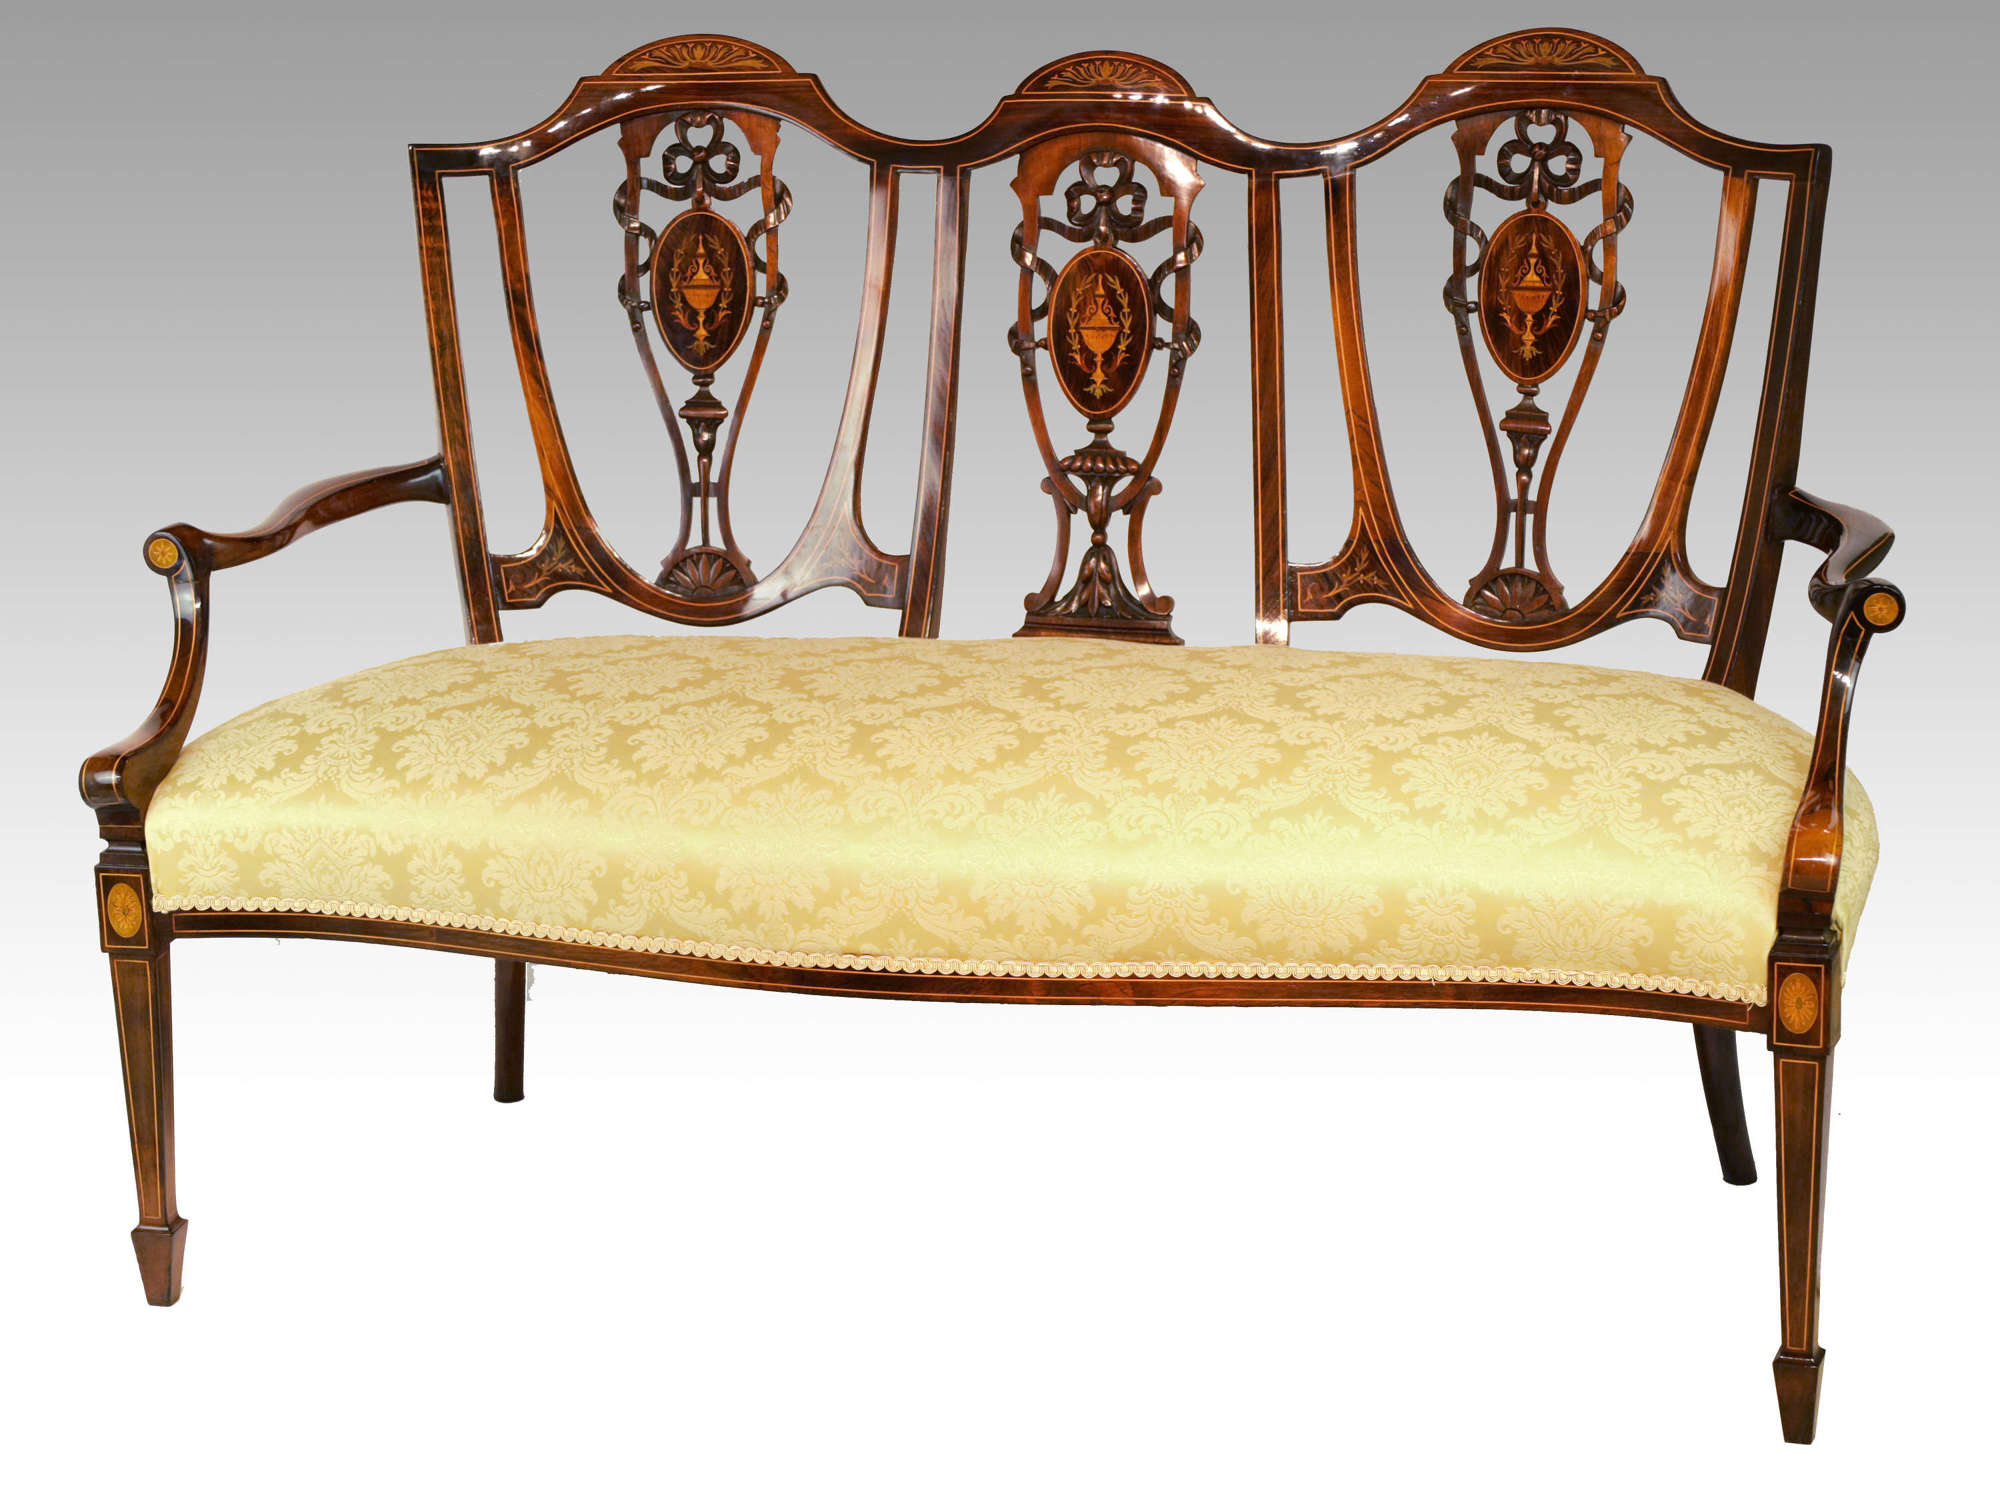 A Fine Quality Late Victorian Rosewood Inlaid Three Seater Settee